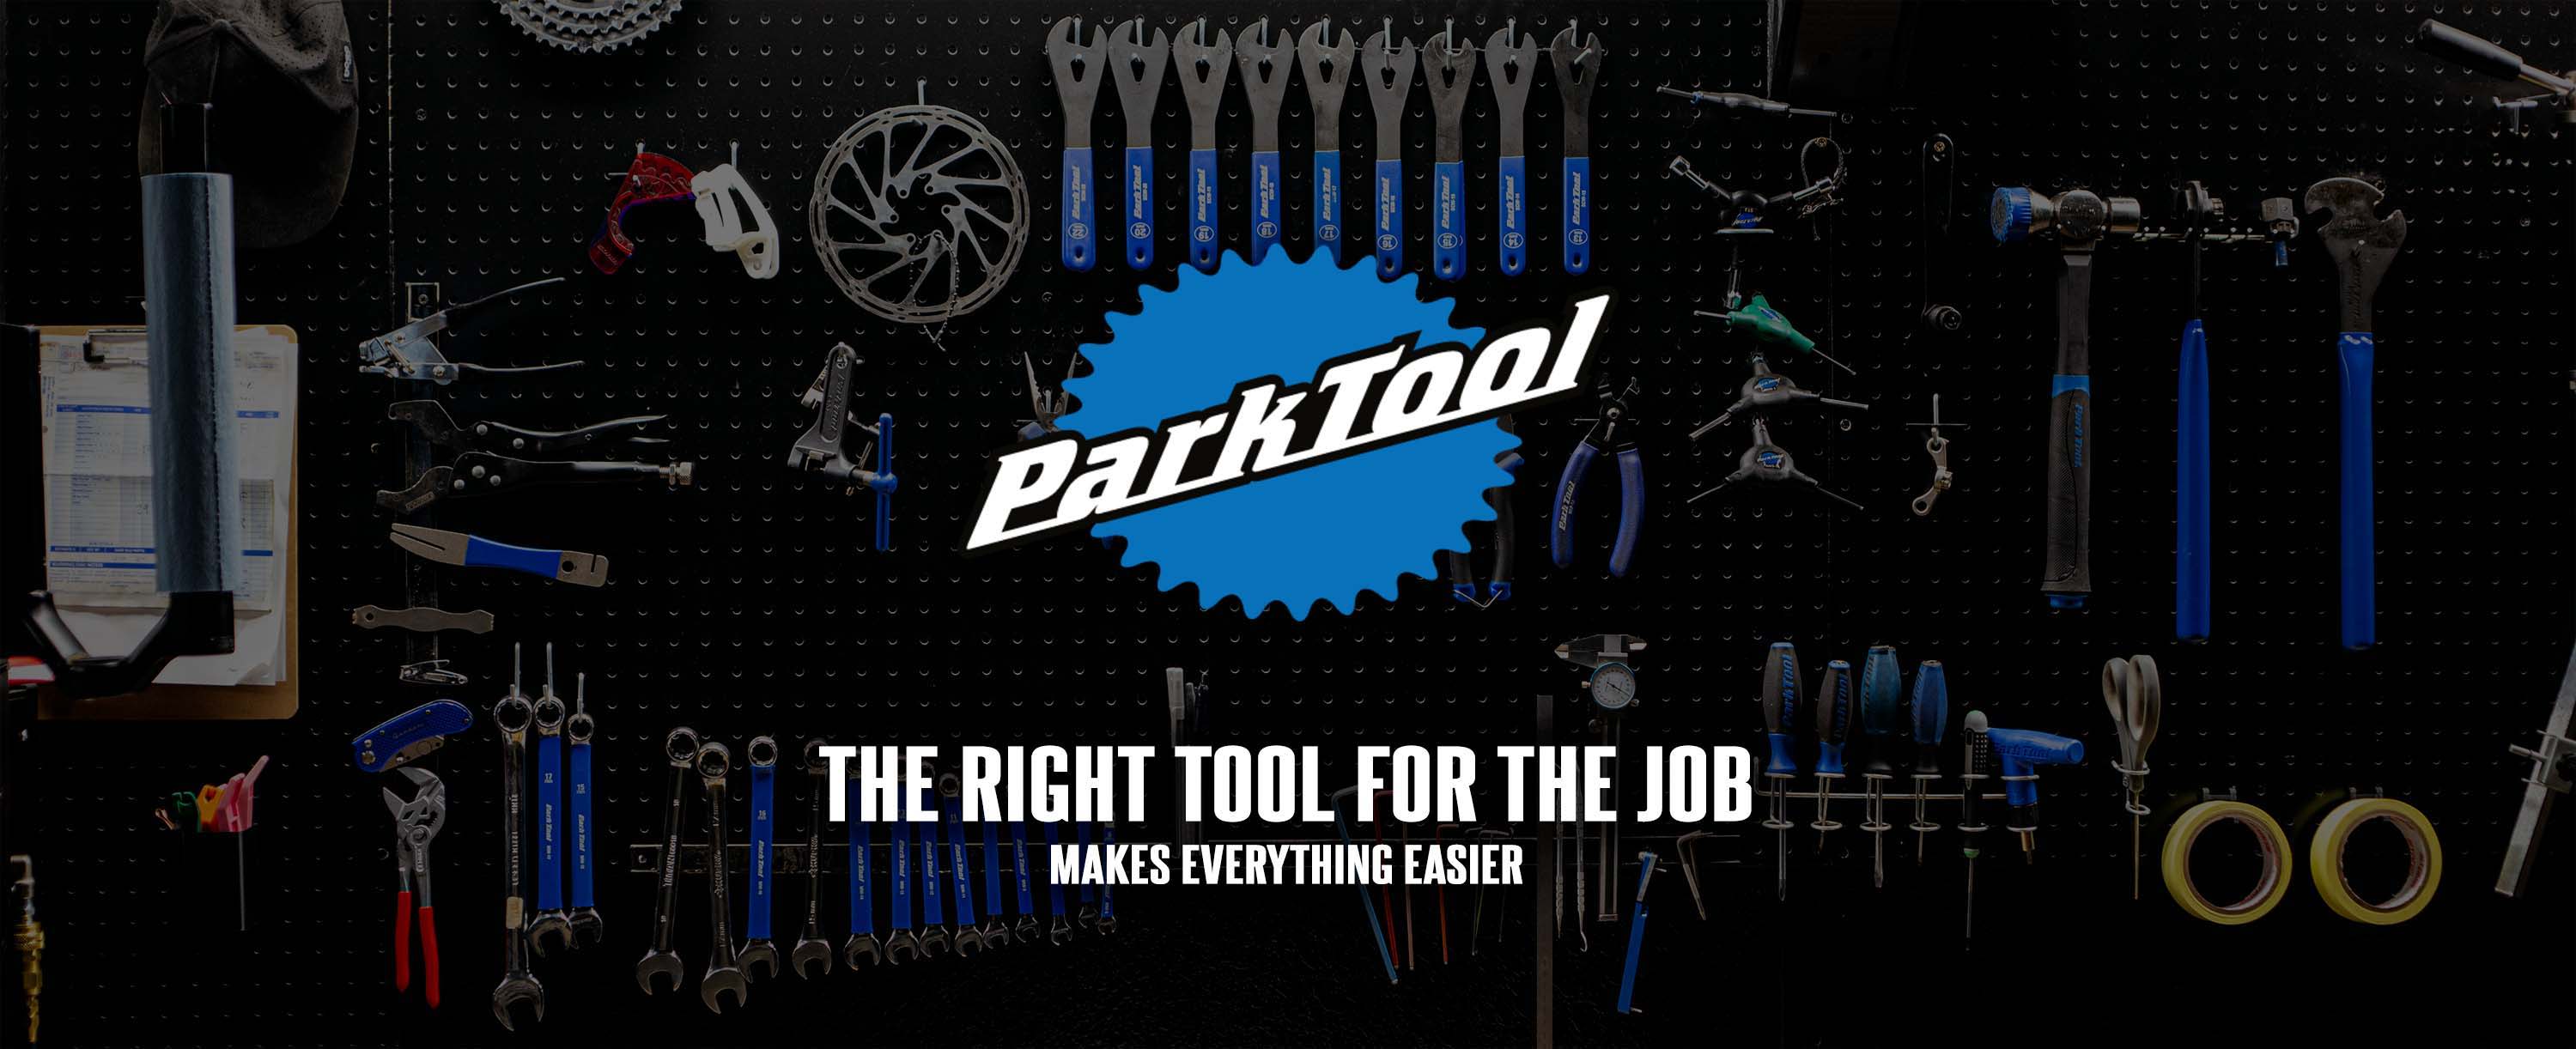 Park tool mountain bike tools slider graphic mtb tools hanging on a work bench